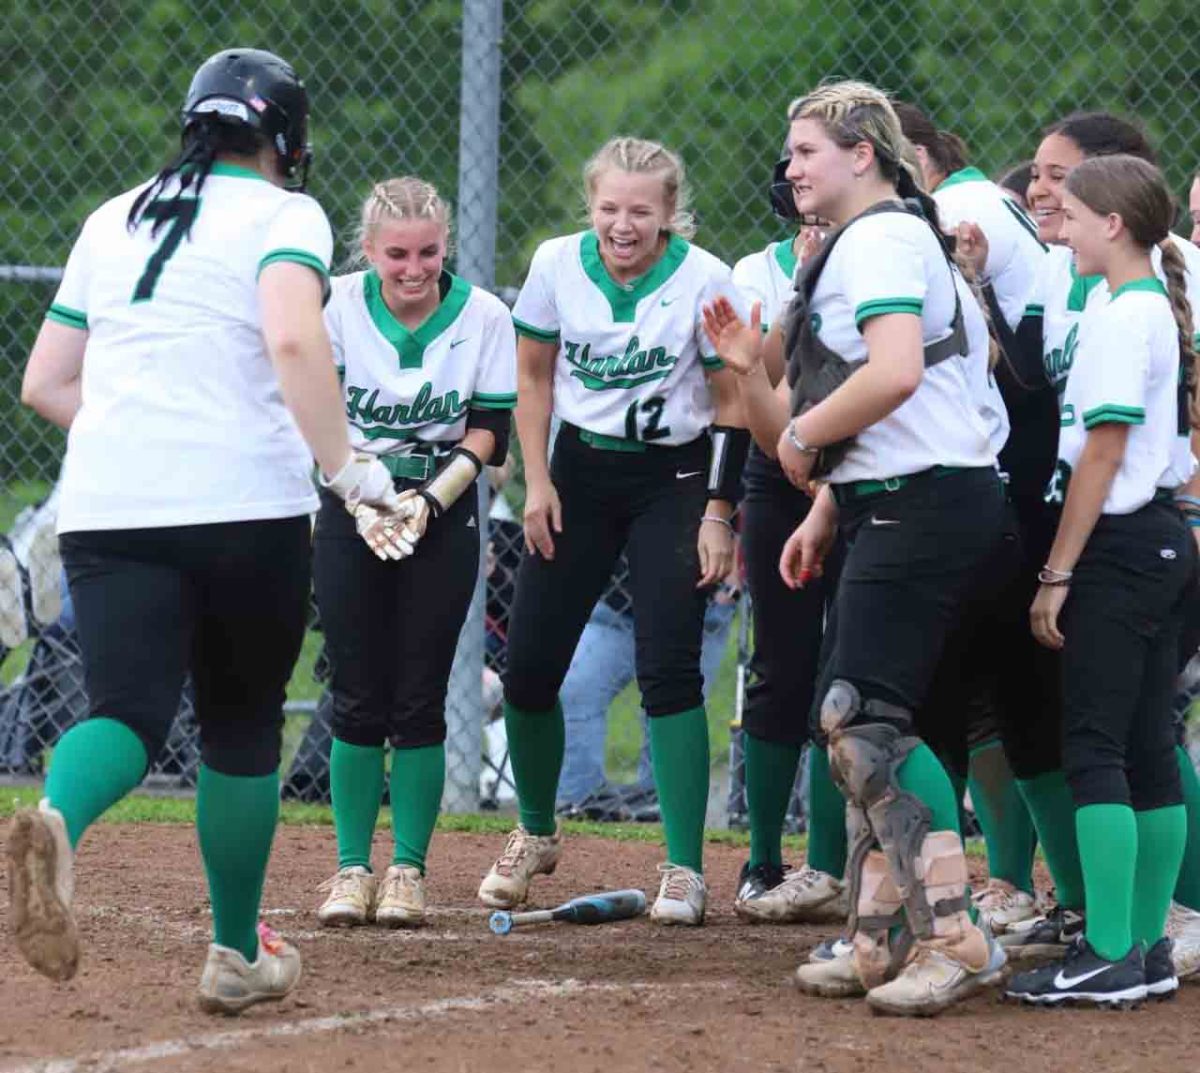 Harlans+Abbi+Fields+was+greeted+at+the+plate+after+her+sixth-inning+homer+in+the+Lady+Dragons+12-8+win+over+Harlan+County.